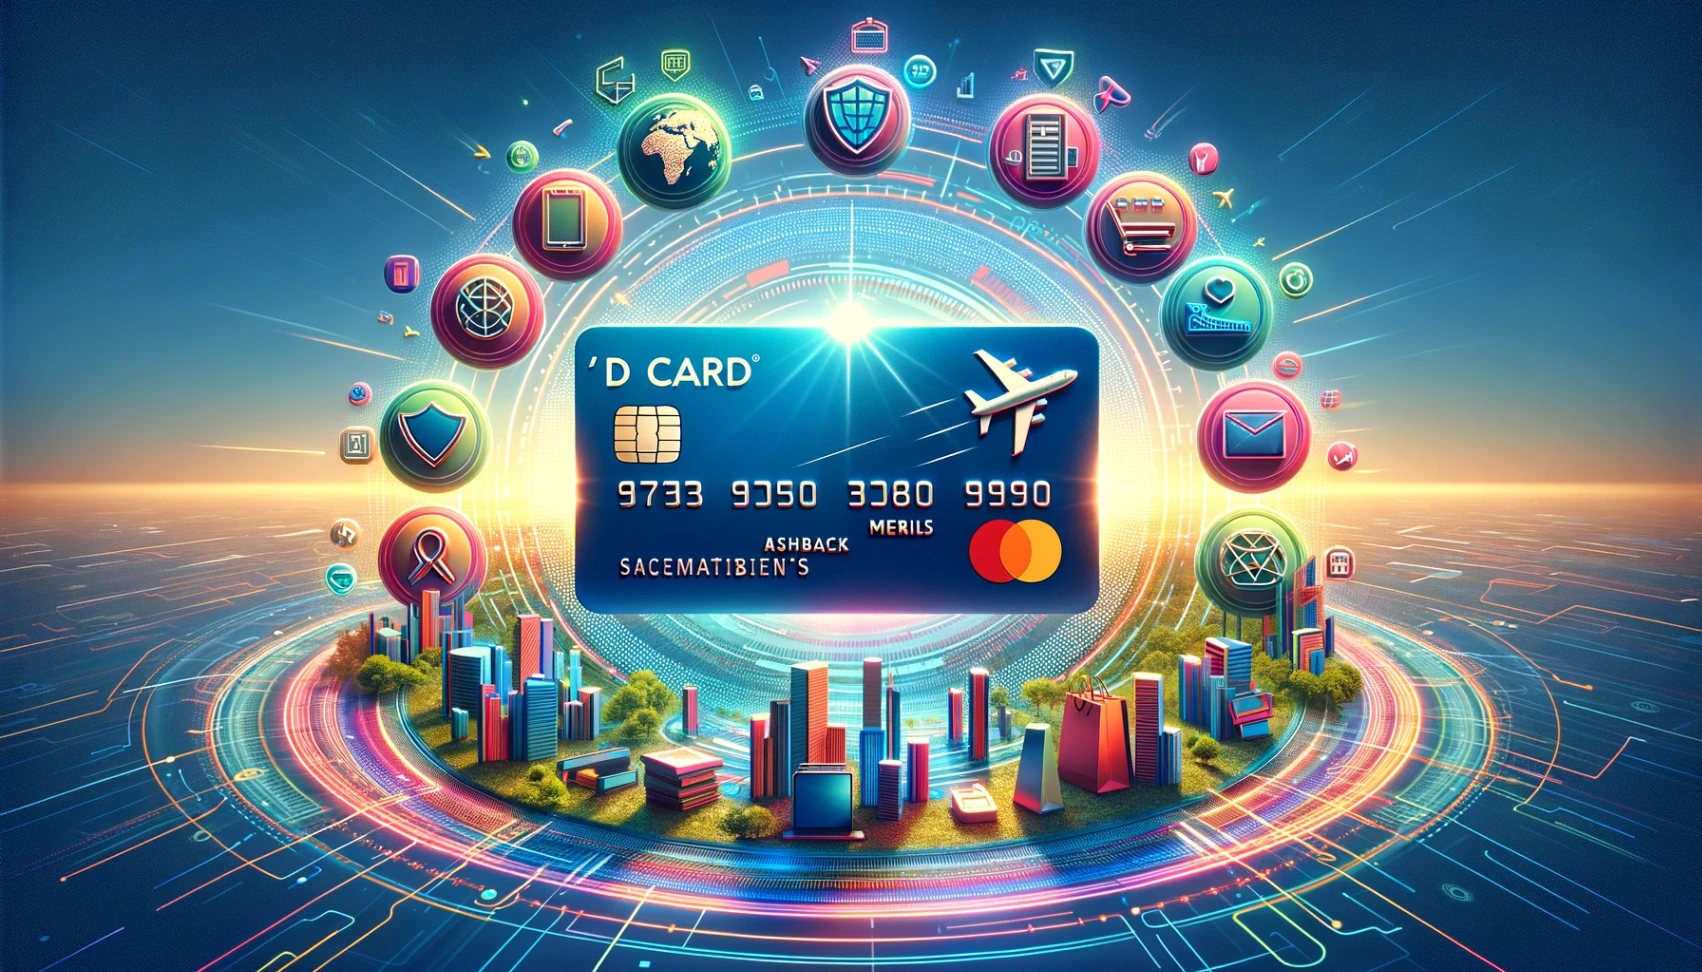 D CARD – Learn the Benefits and How to Apply Online